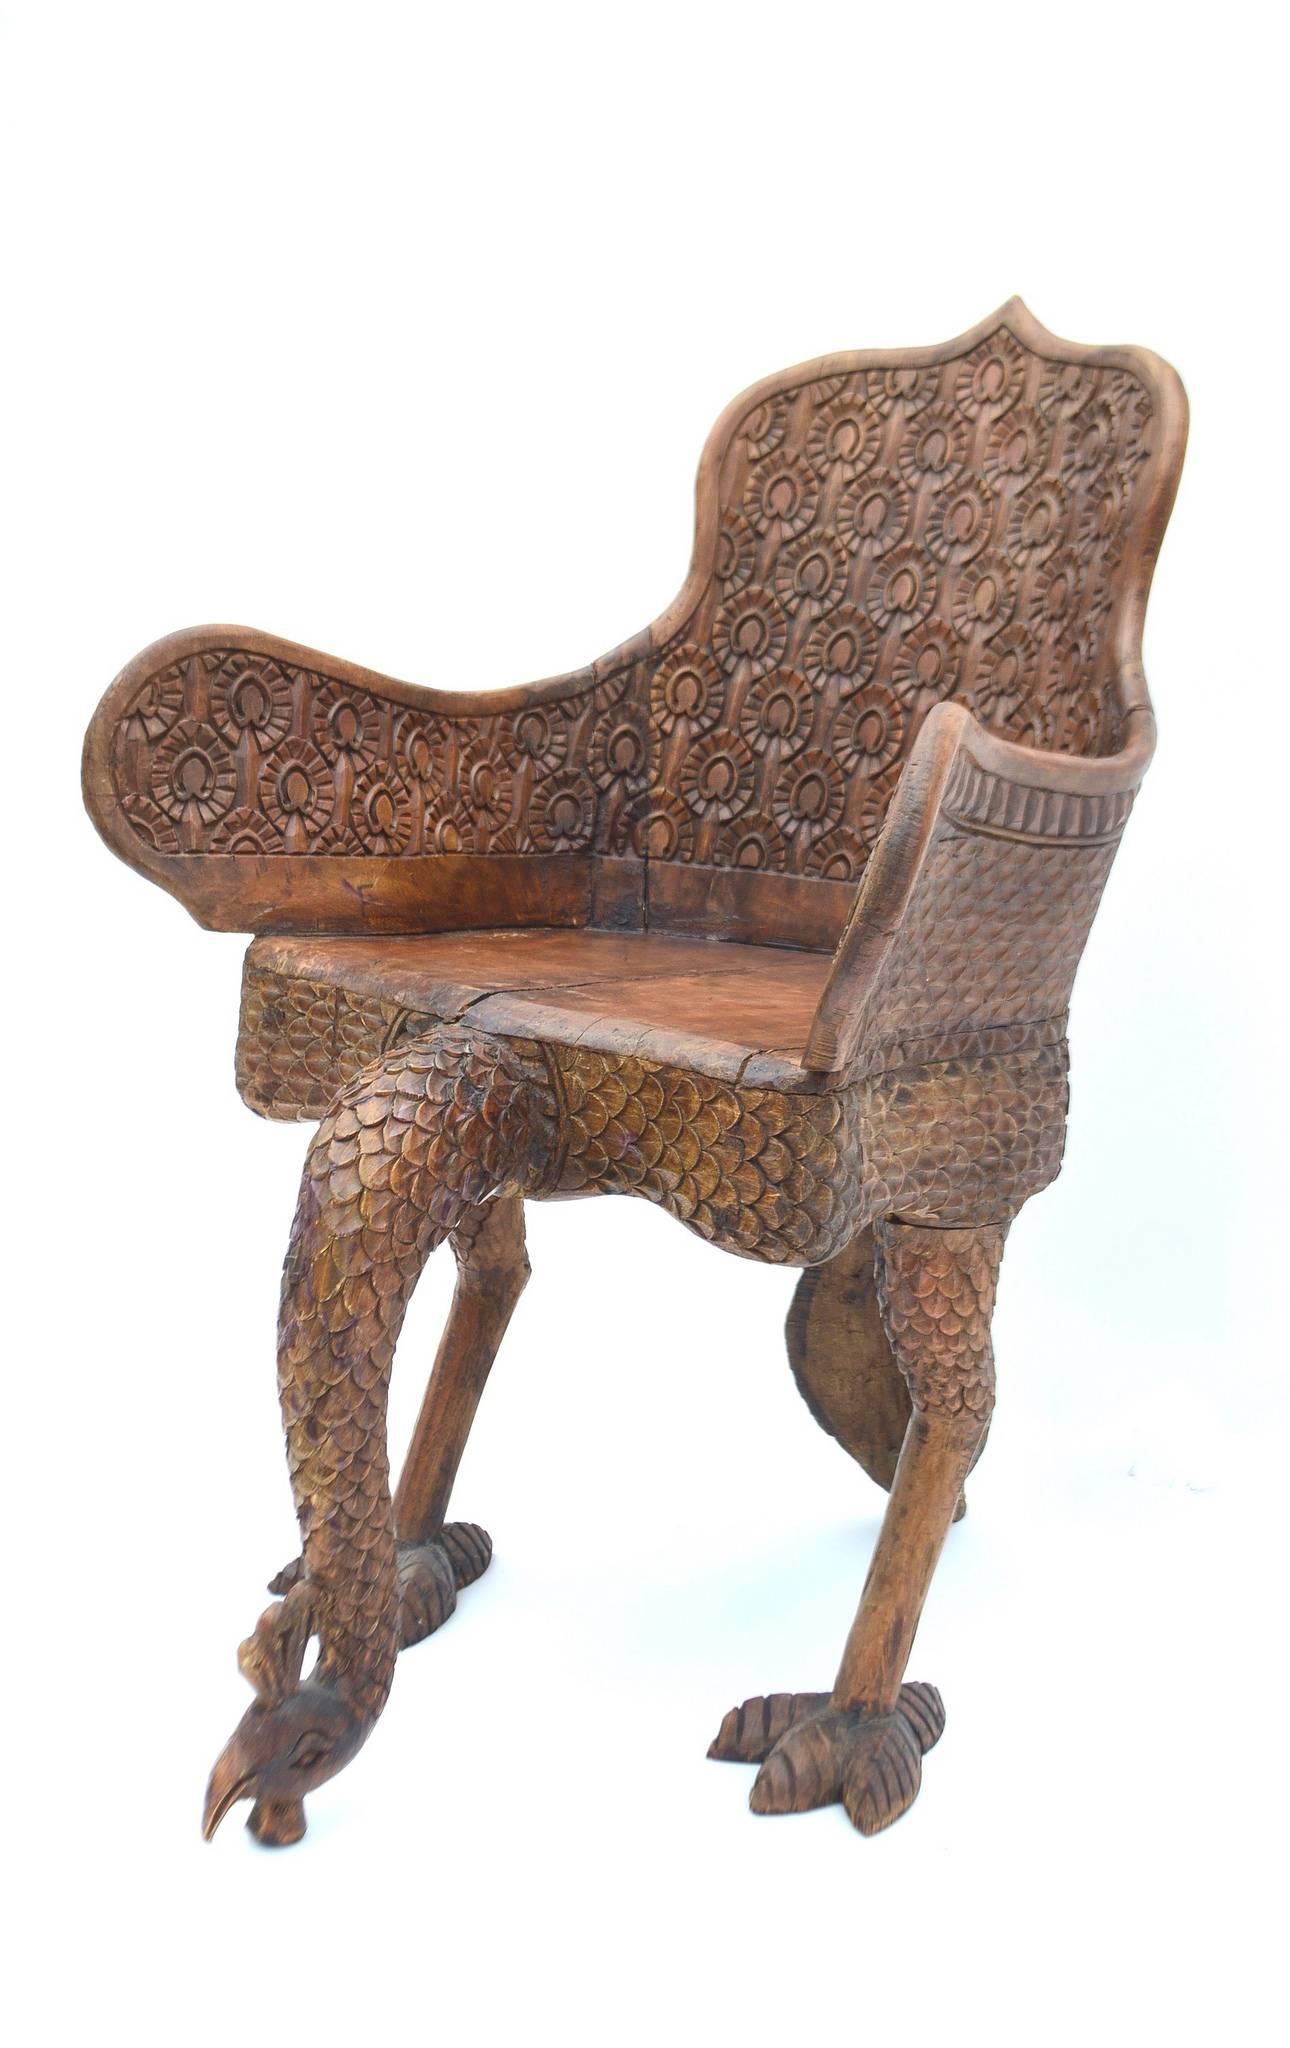 wooden peacock chair